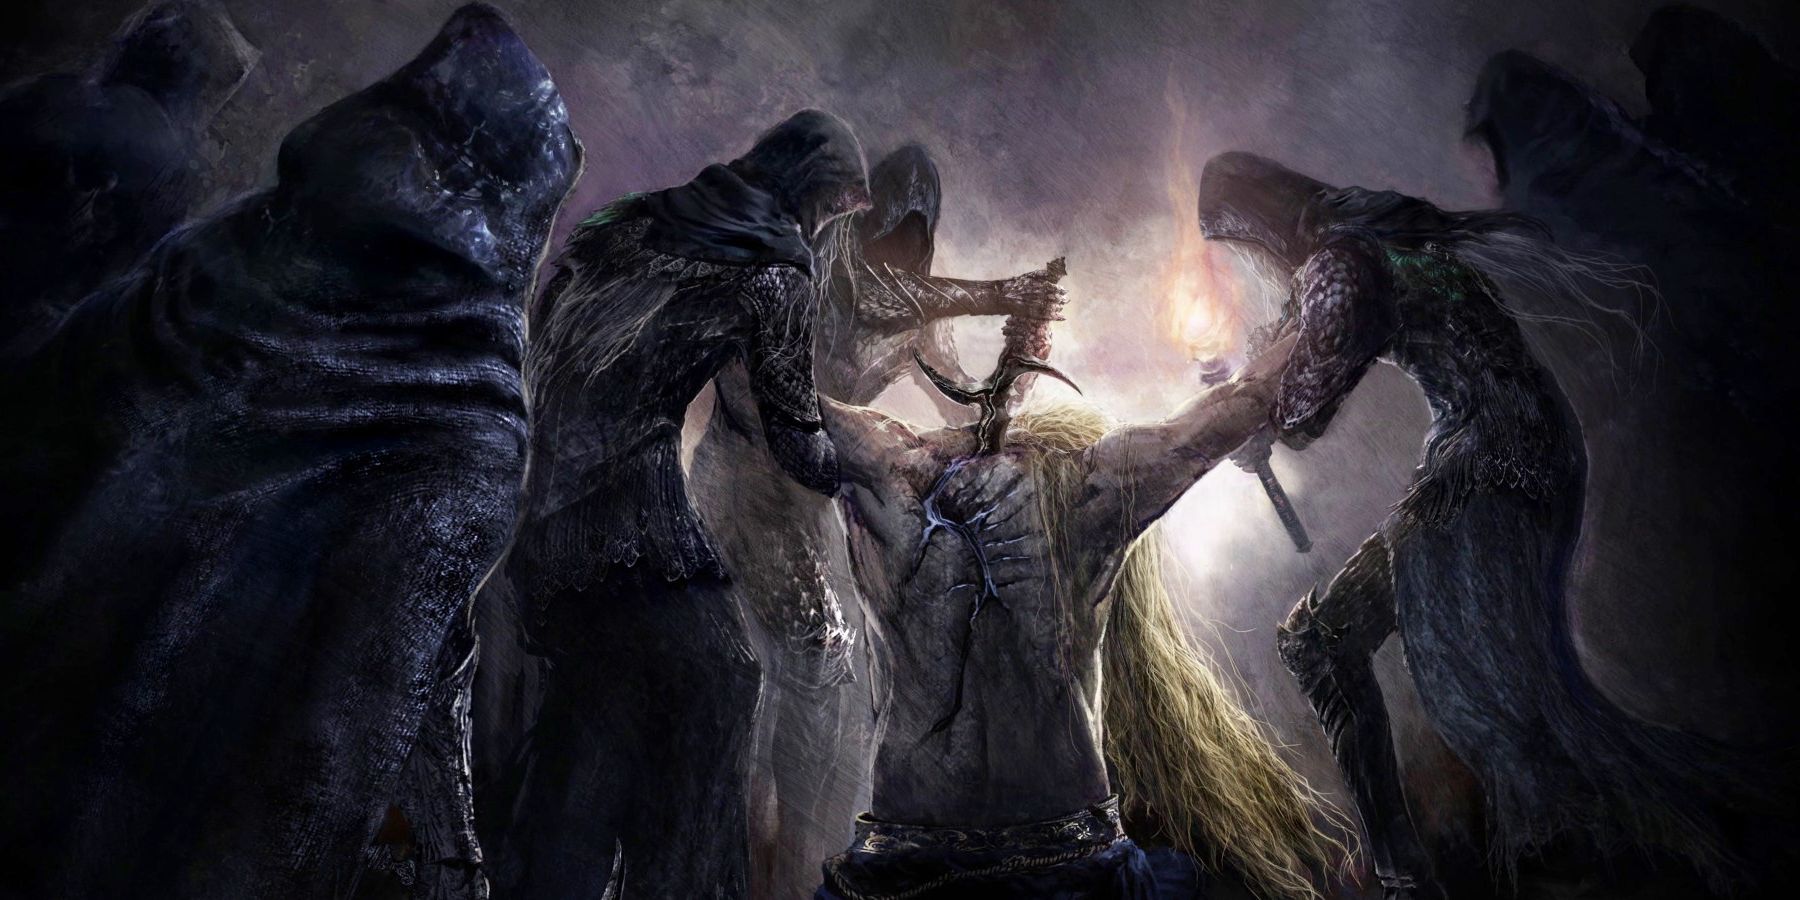 Elden Ring's coolest quest is loaded with hidden lore about Godwyn the Golden's assassination.